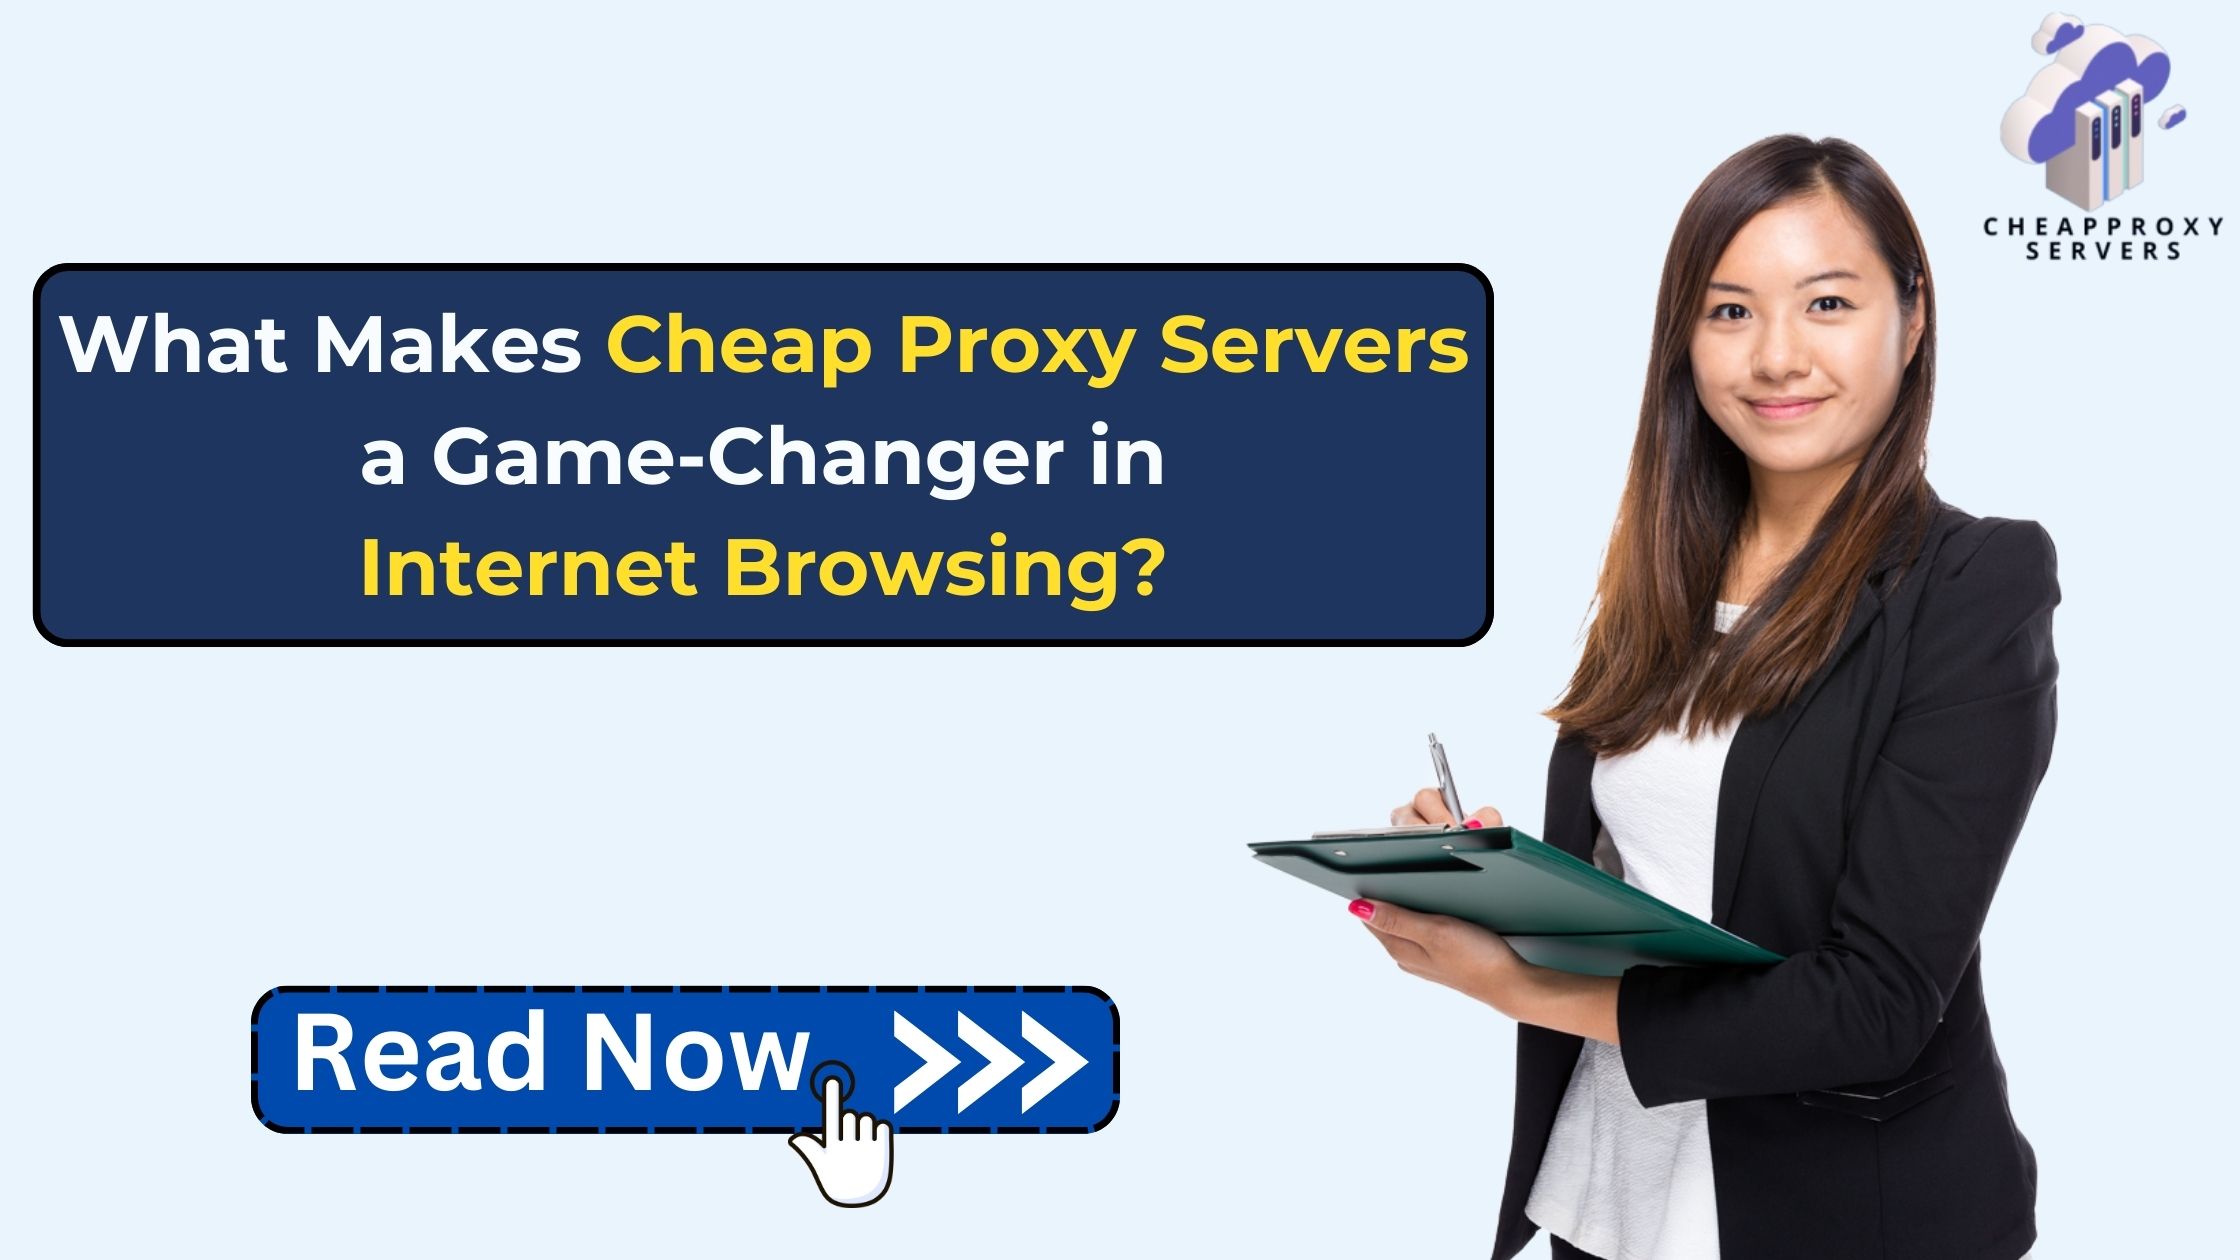 What Makes Cheap Proxy Servers a Game-Changer in Internet Browsing?